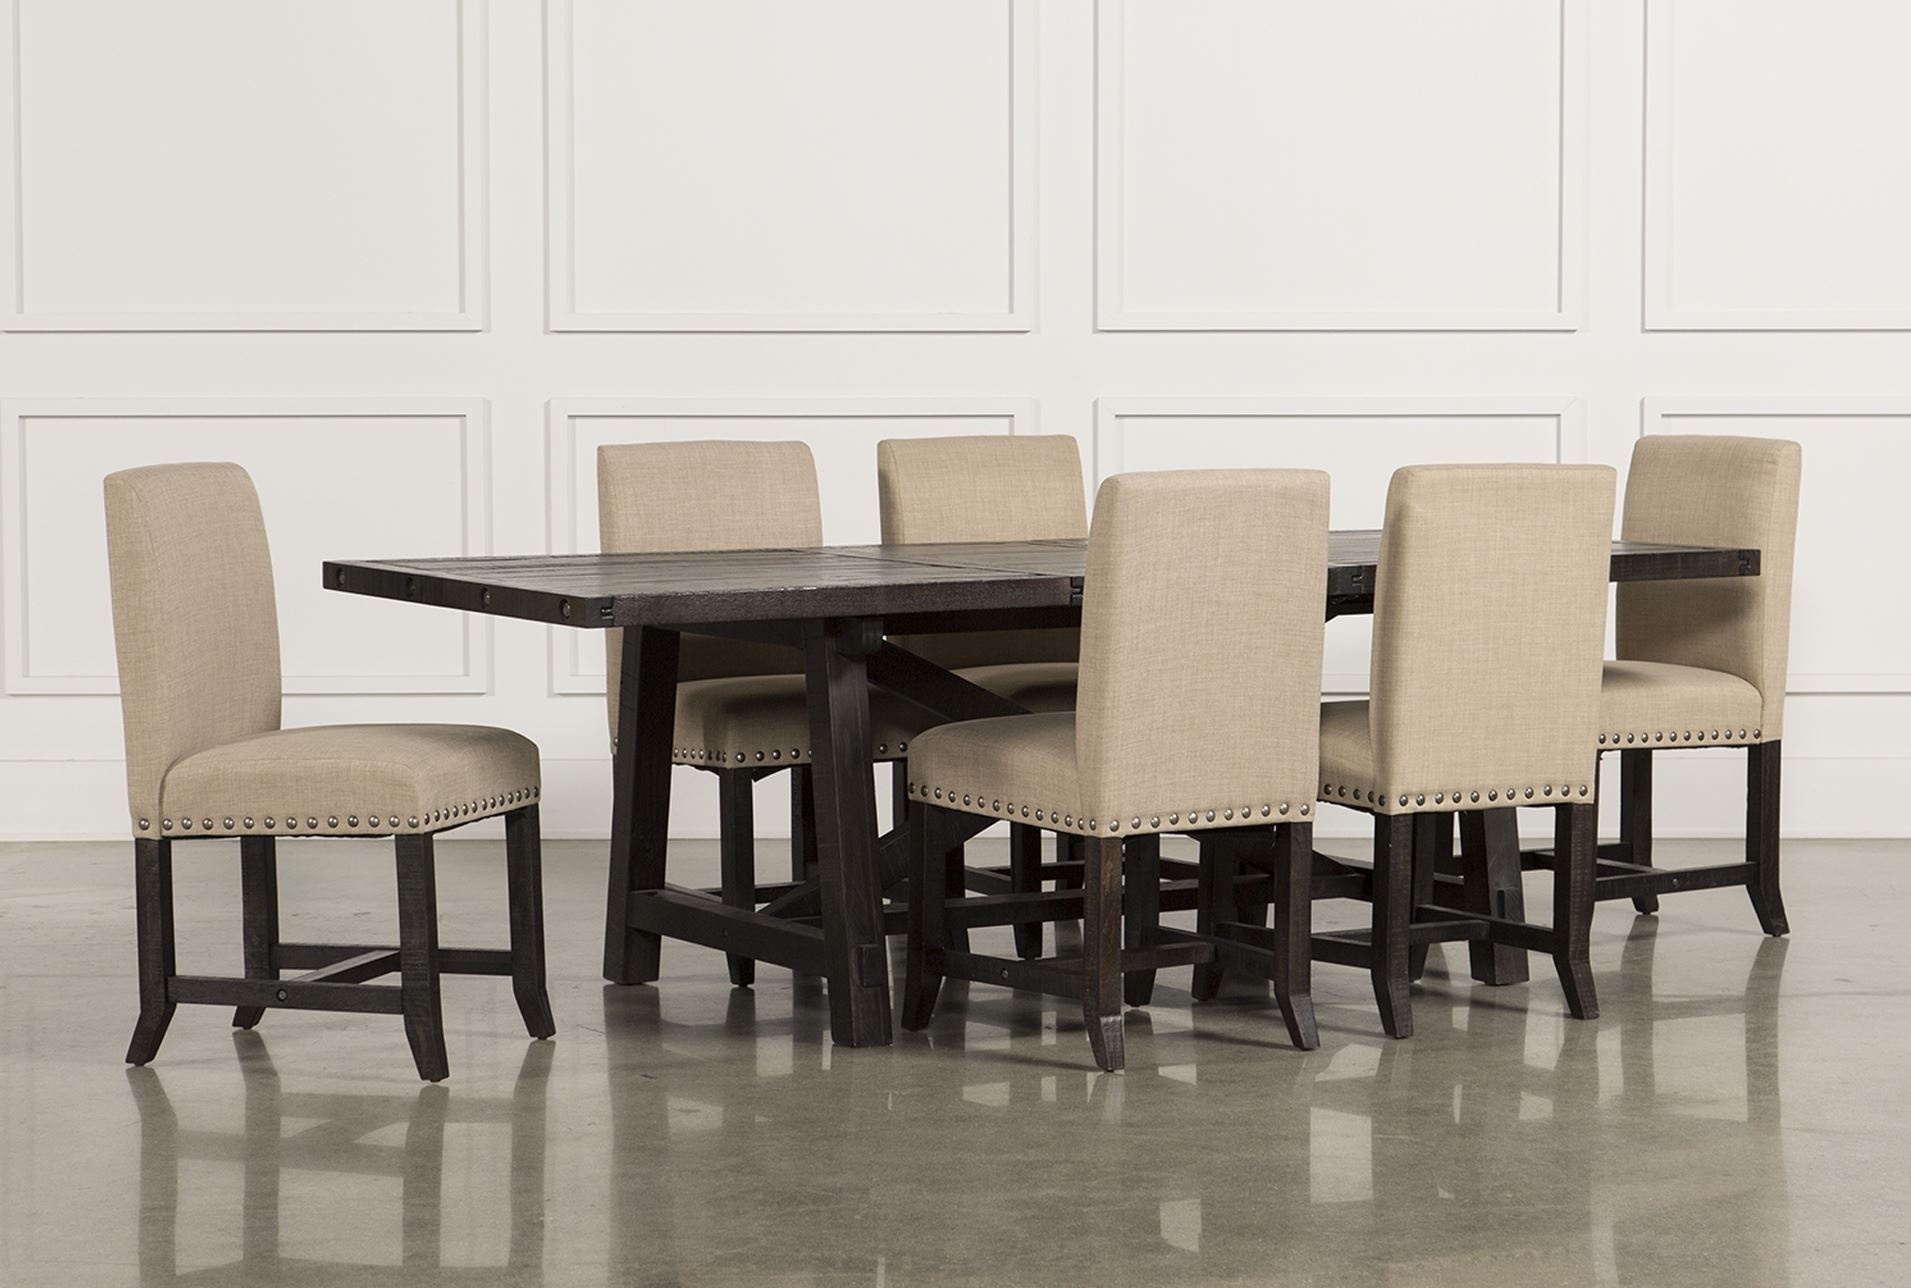 Jaxon Upholstered Side Chairs Throughout Most Popular Jaxon 7 Piece Rectangle Dining Set W/upholstered Chairs (View 6 of 20)